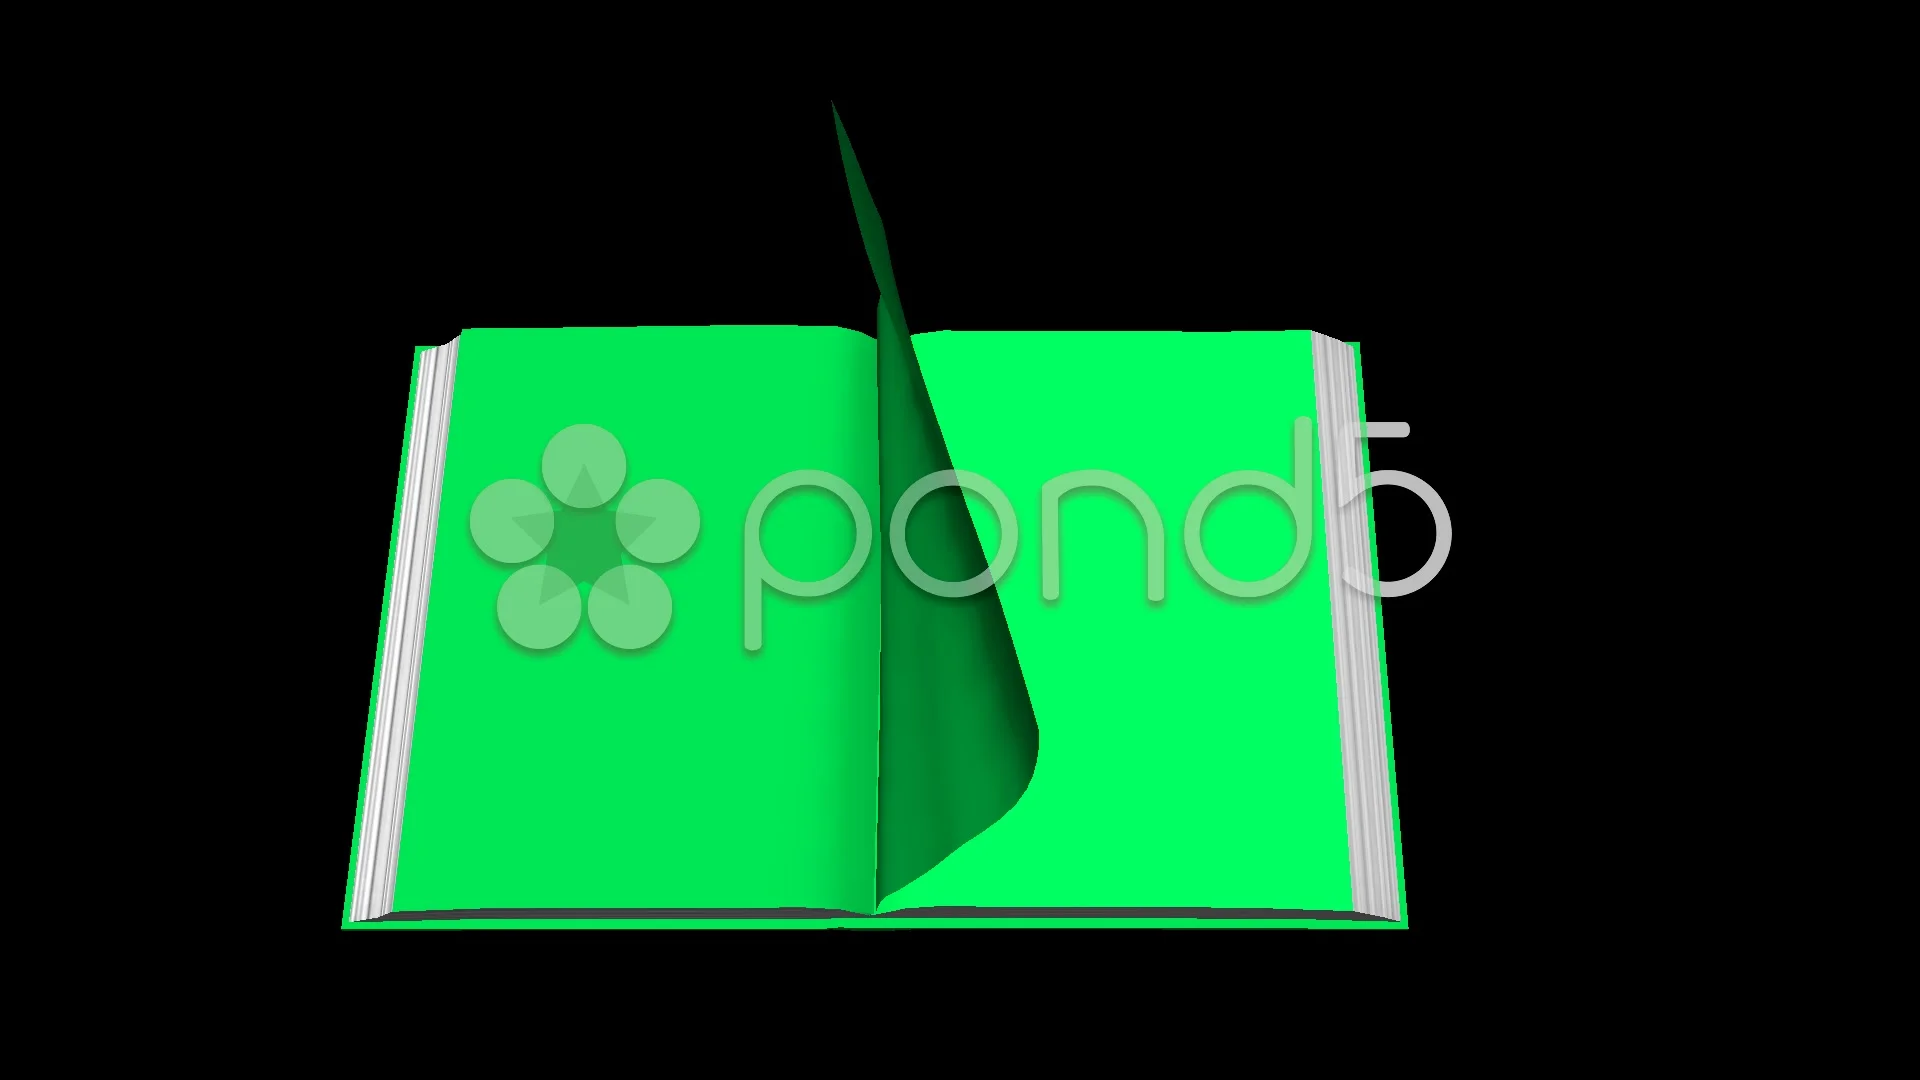 Opening Old Book Animation in Green Screen, All Design Creative